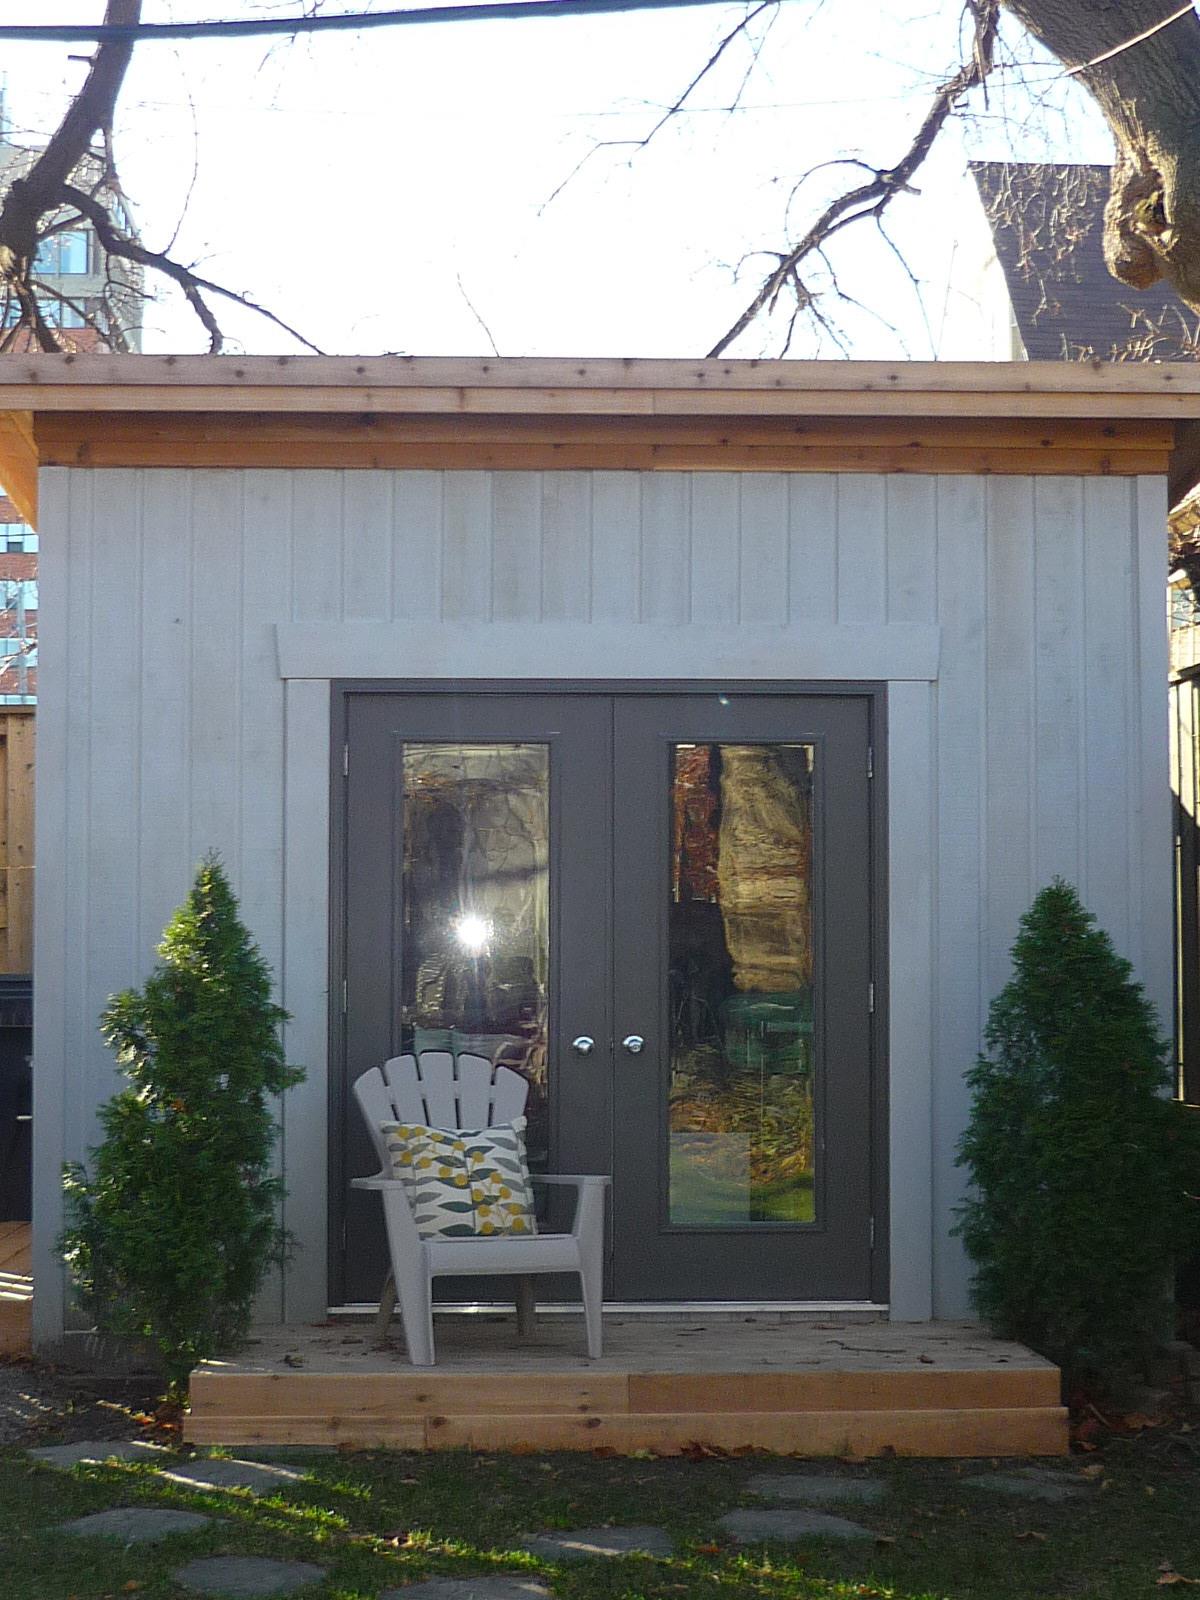 Urban Studio Pool House with French Doors in Toronto. Summerwood ID number 205686-1.